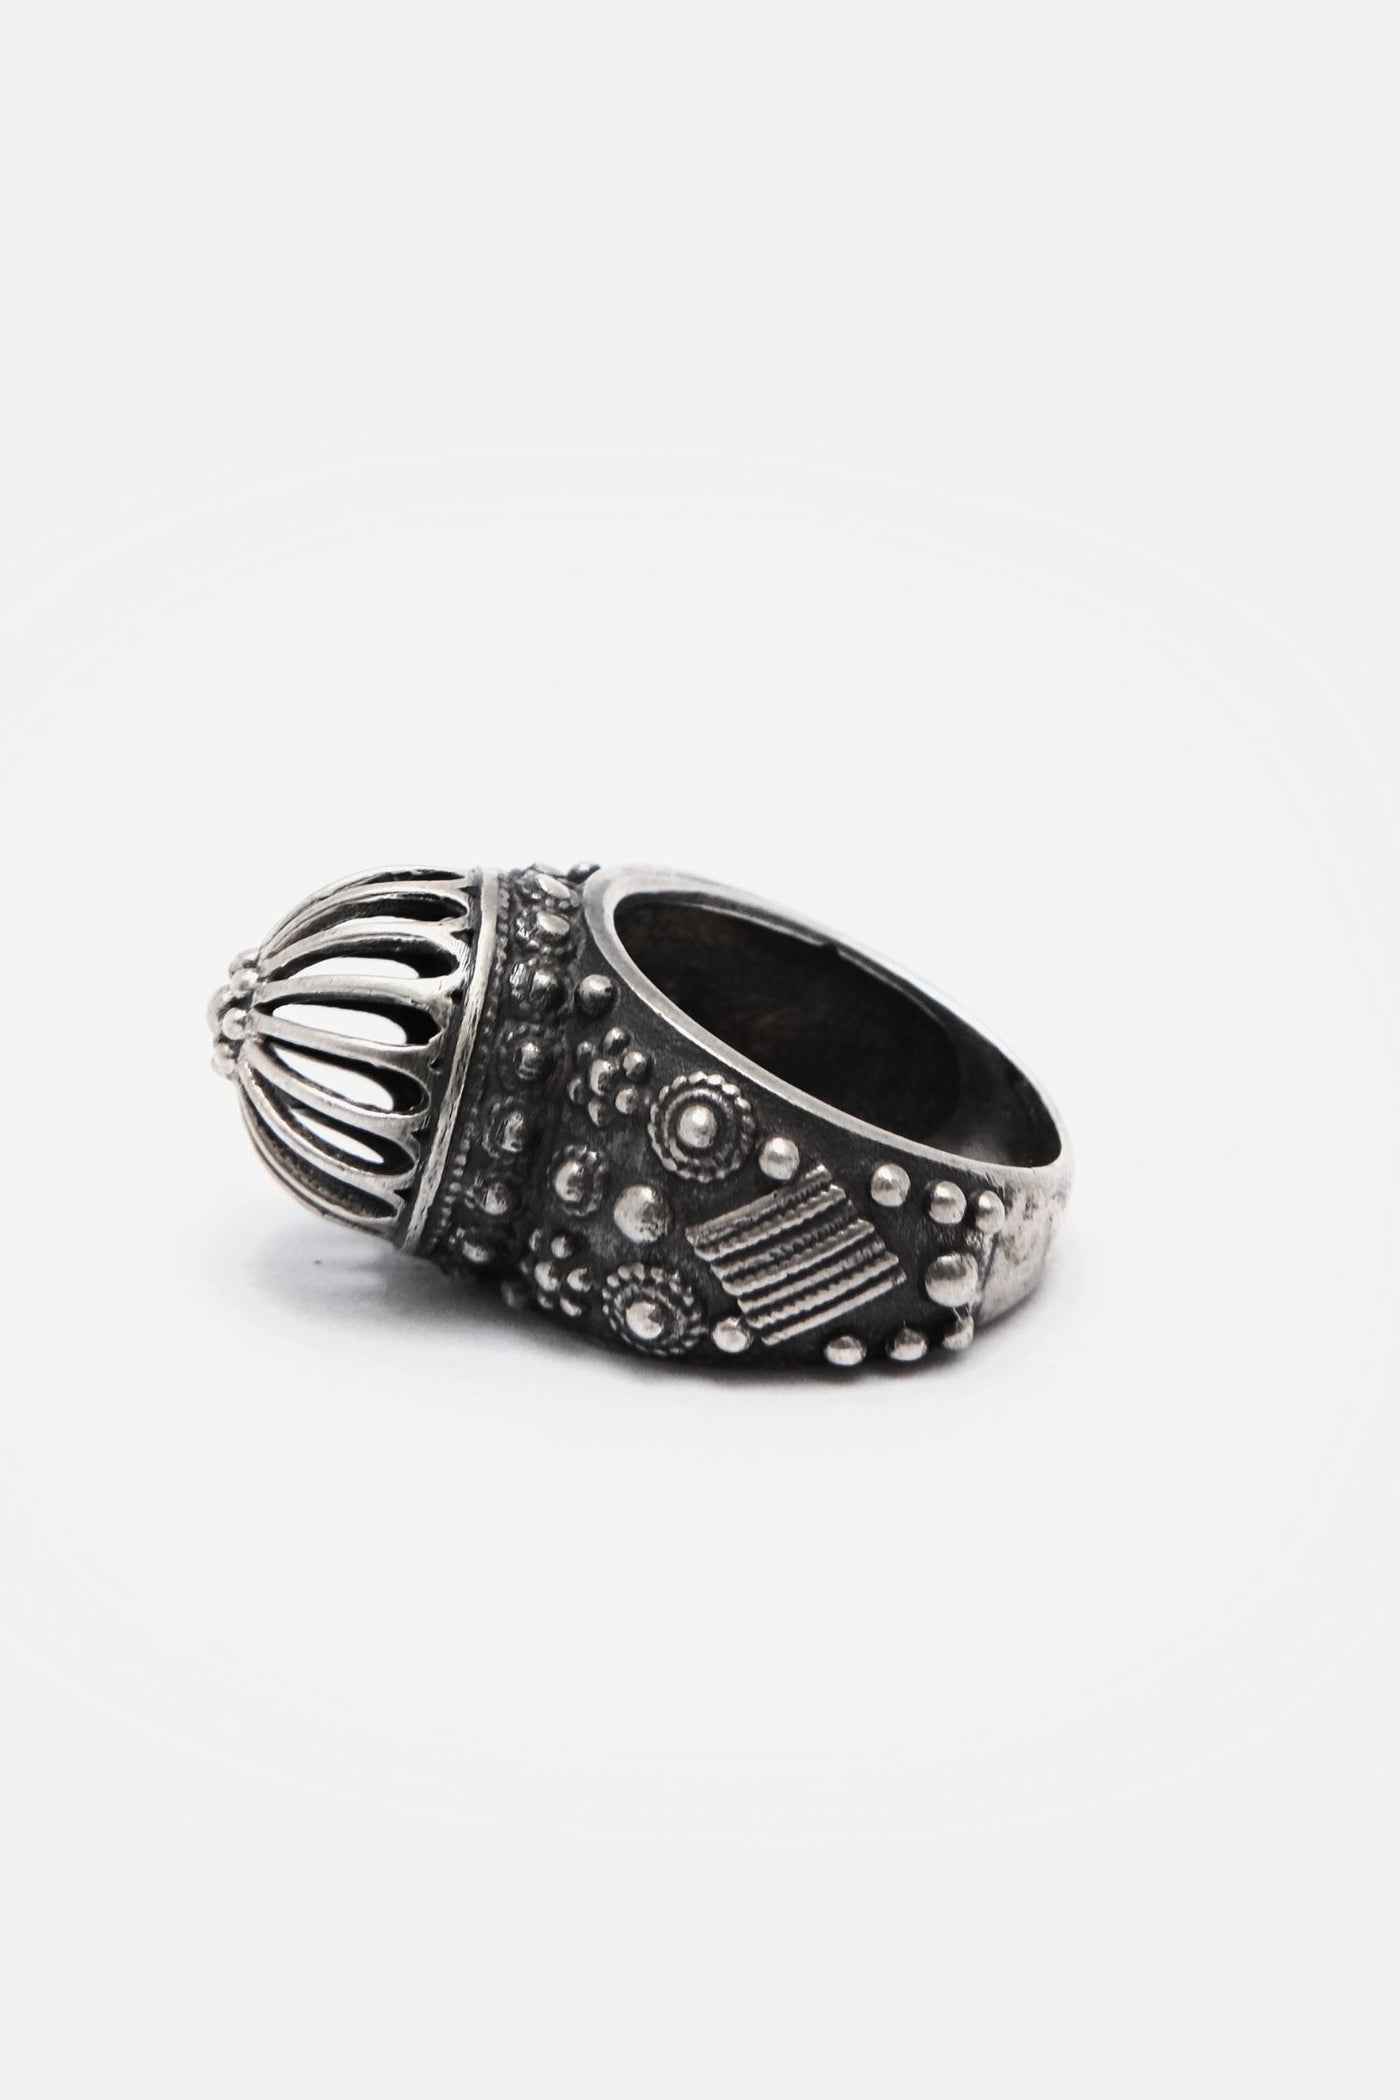 Domed Structure Cut Work Hand Ring